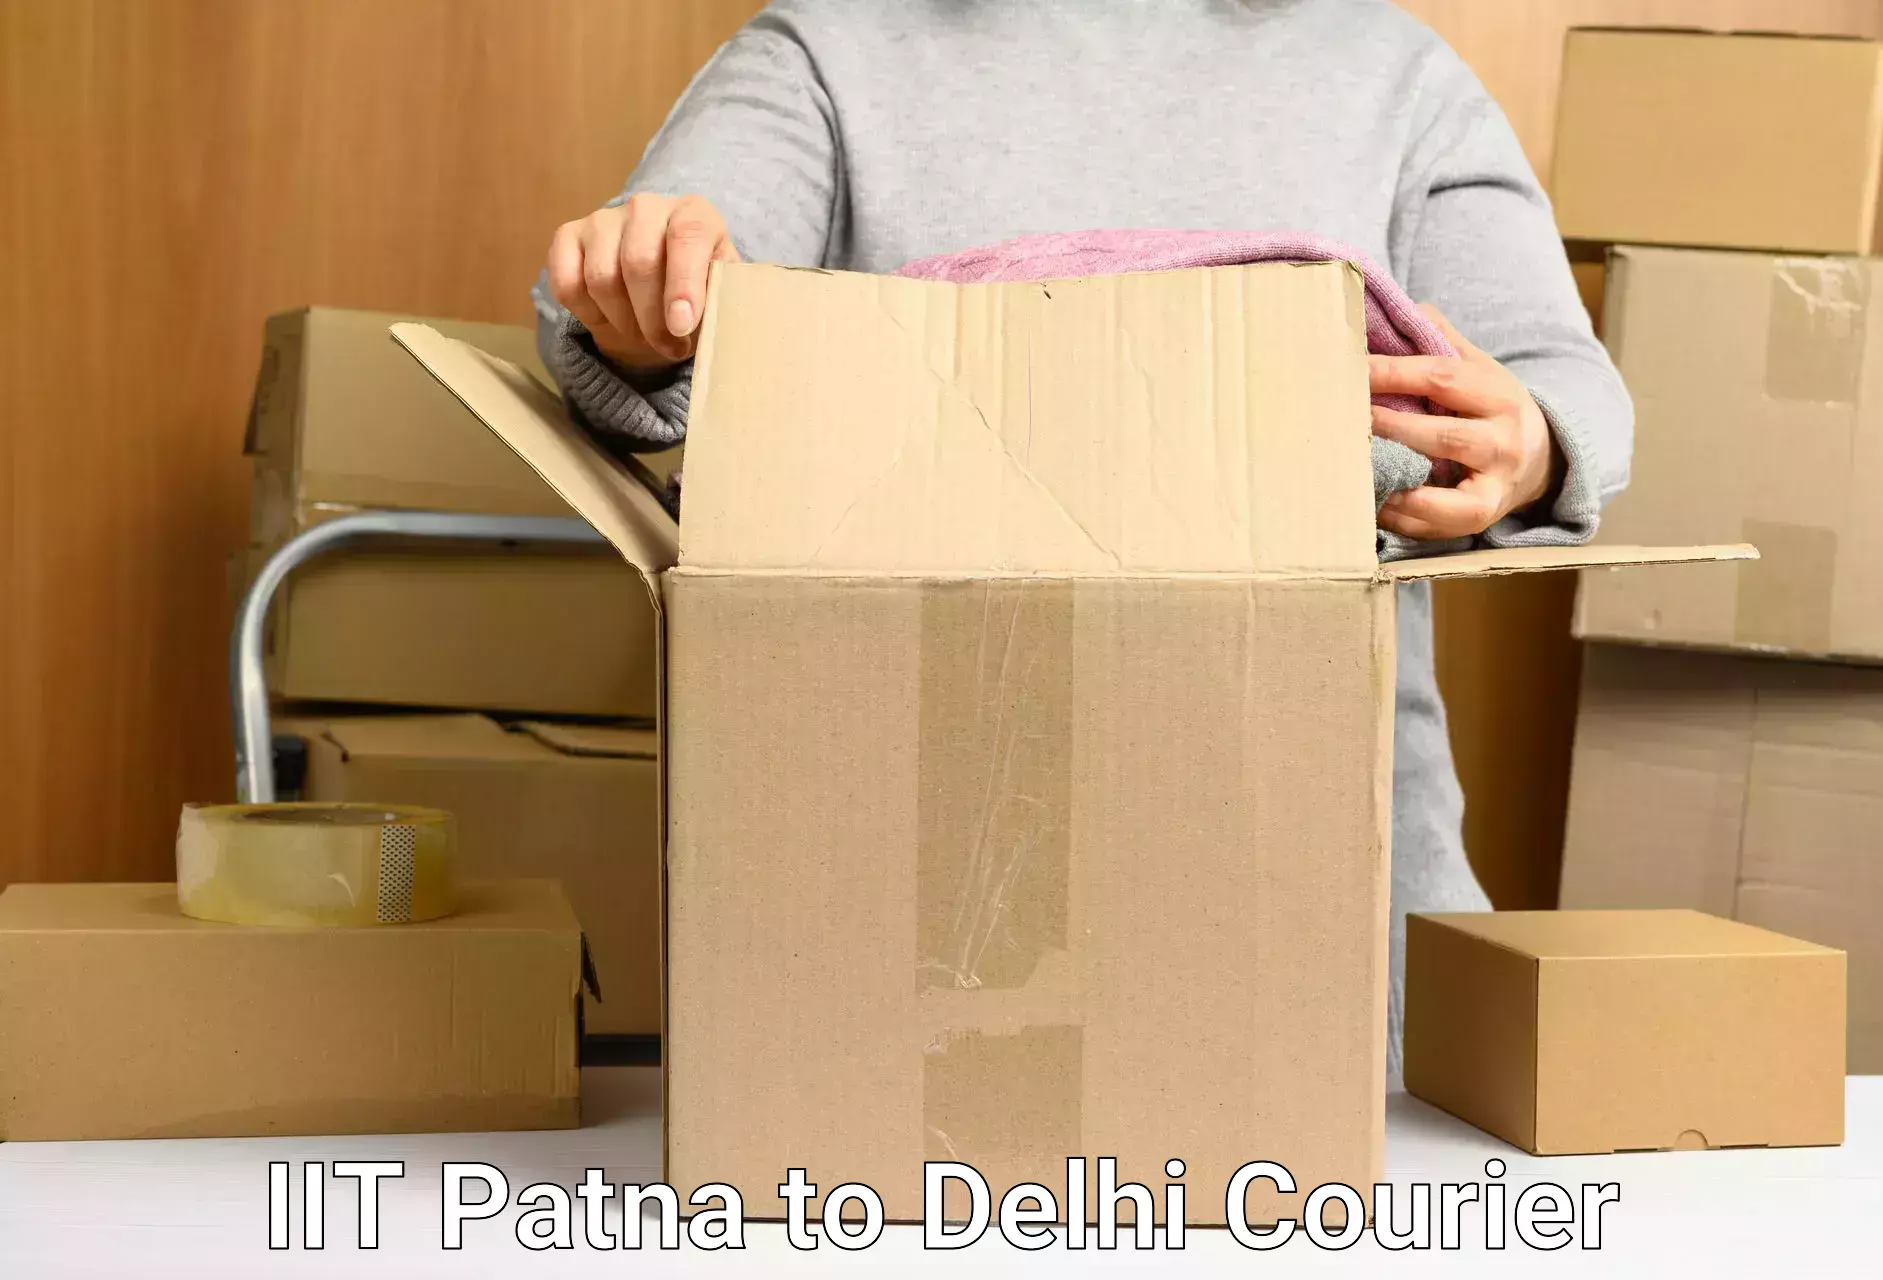 Customer-friendly courier services IIT Patna to Burari